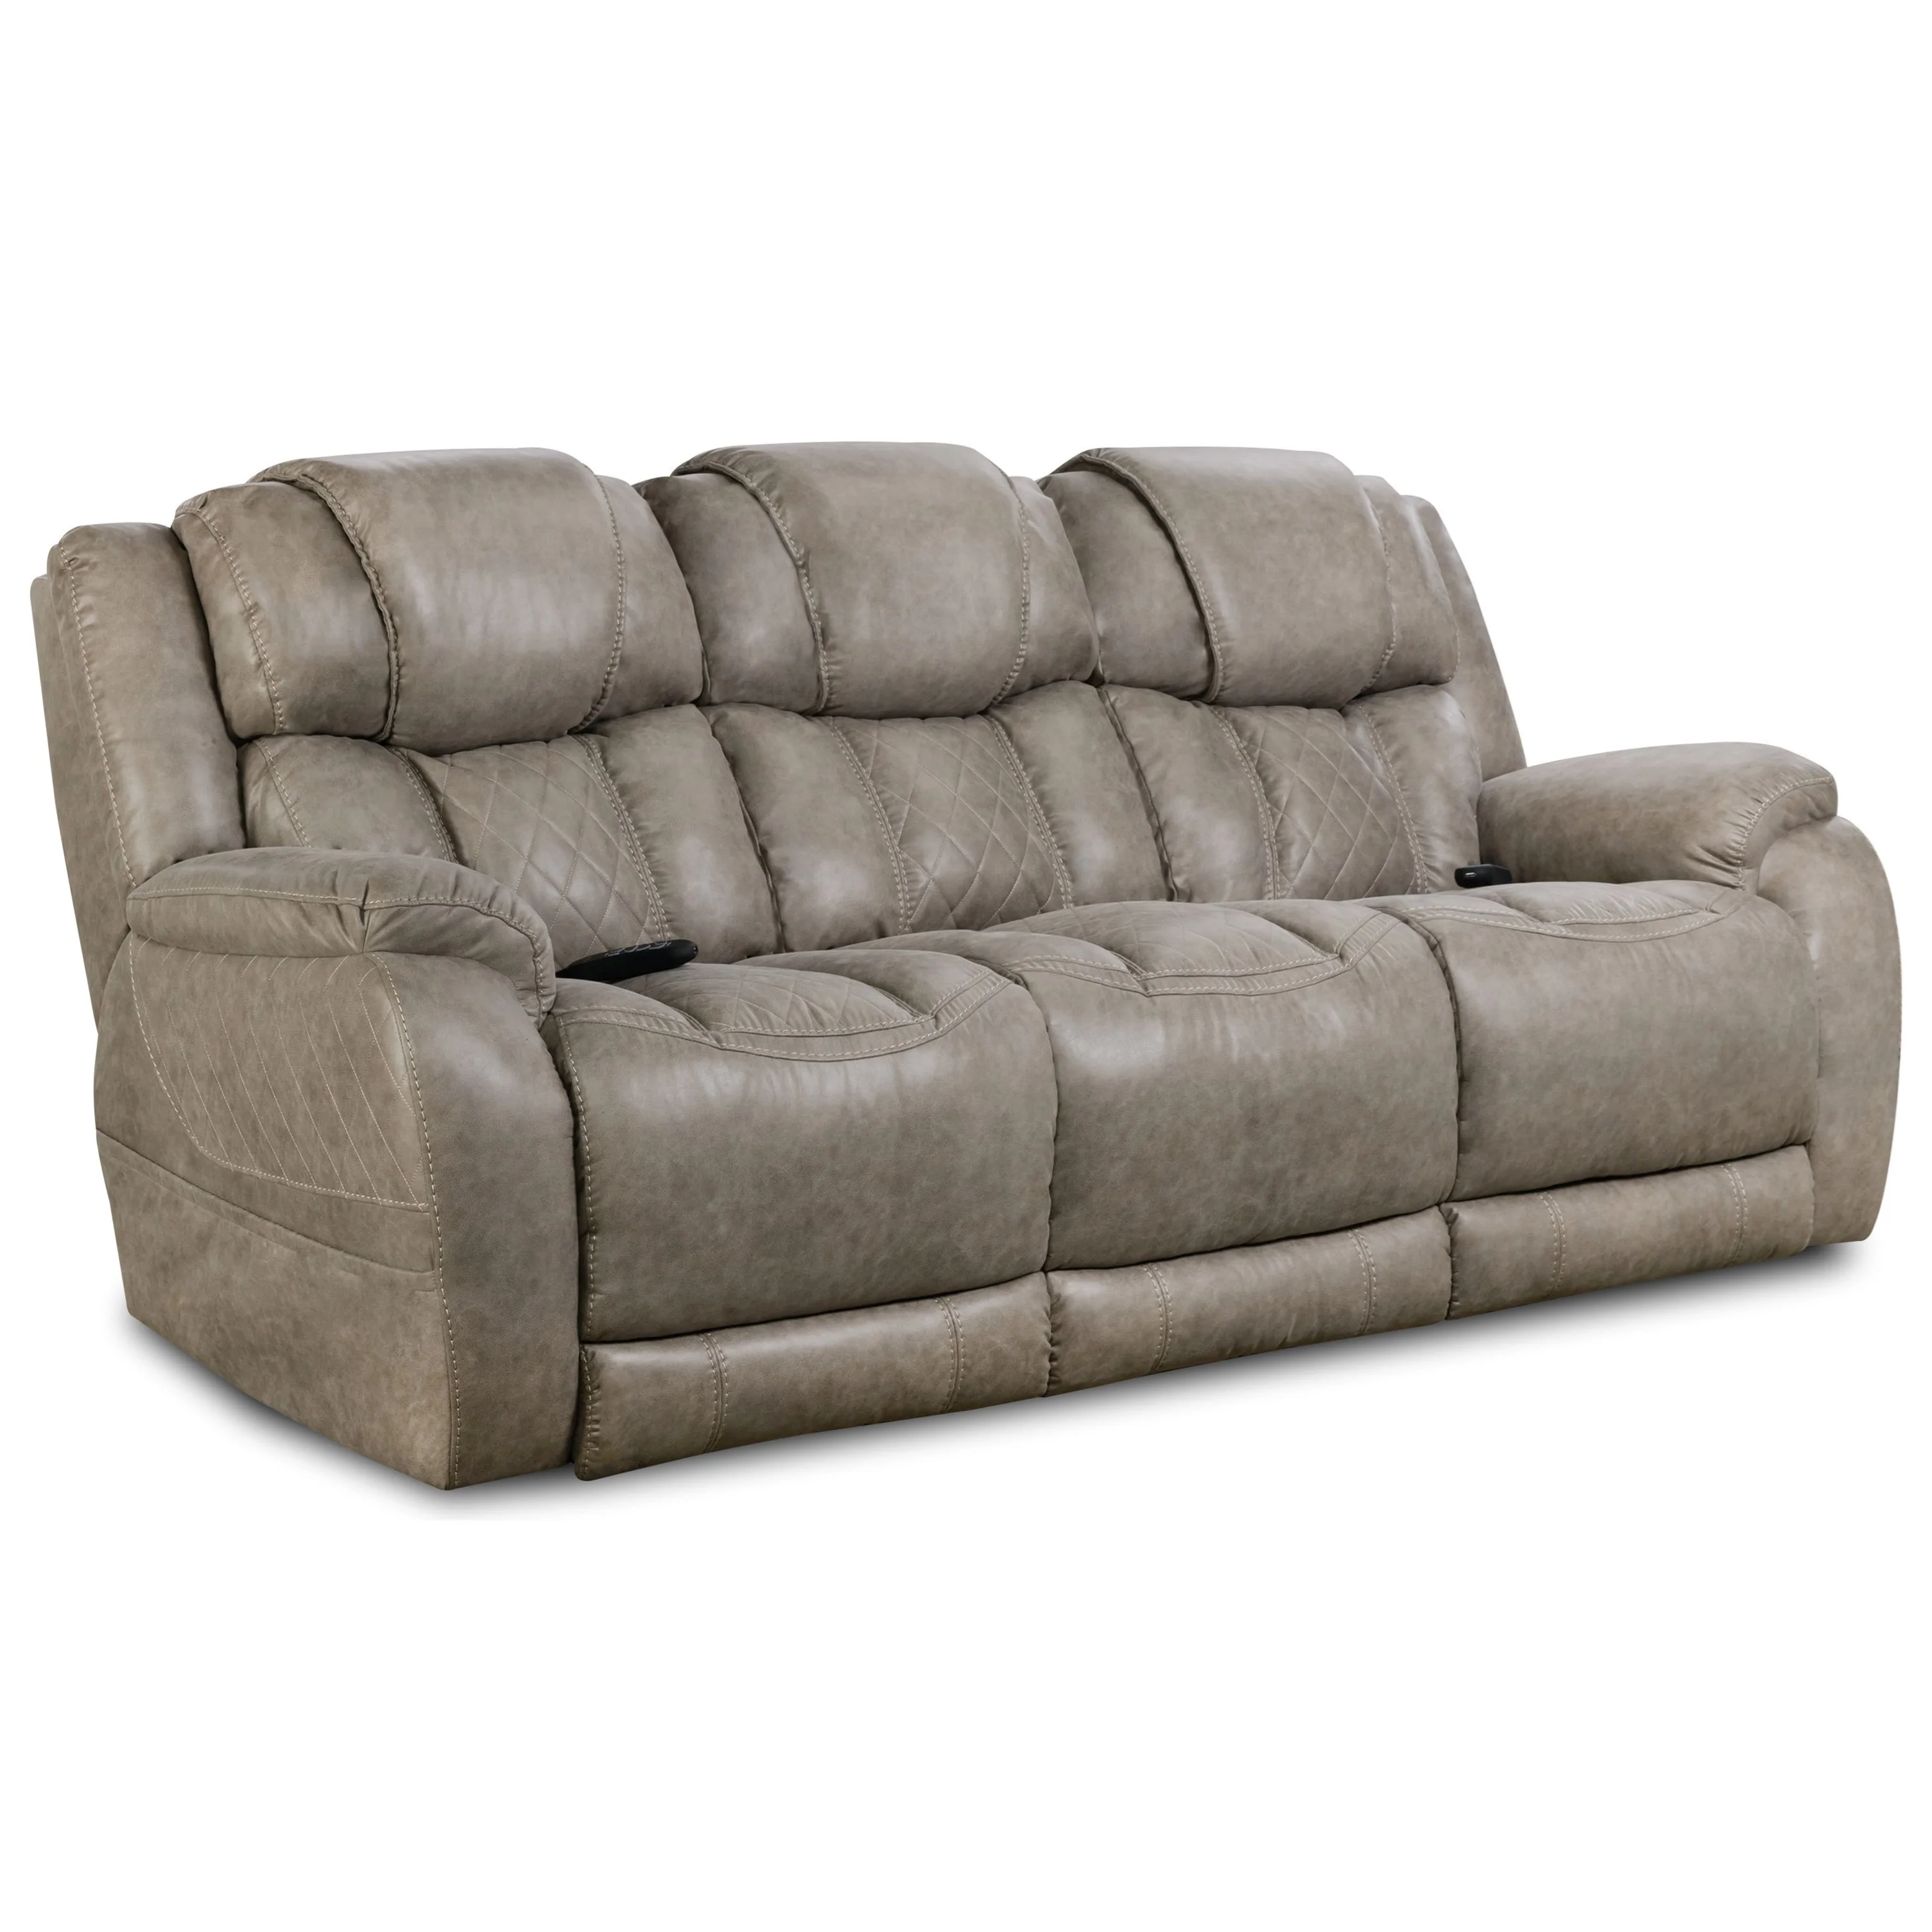 Homestretch 174 Hs1066 Casual Style Double Reclining Power Sofa Van Hill Furniture Reclining